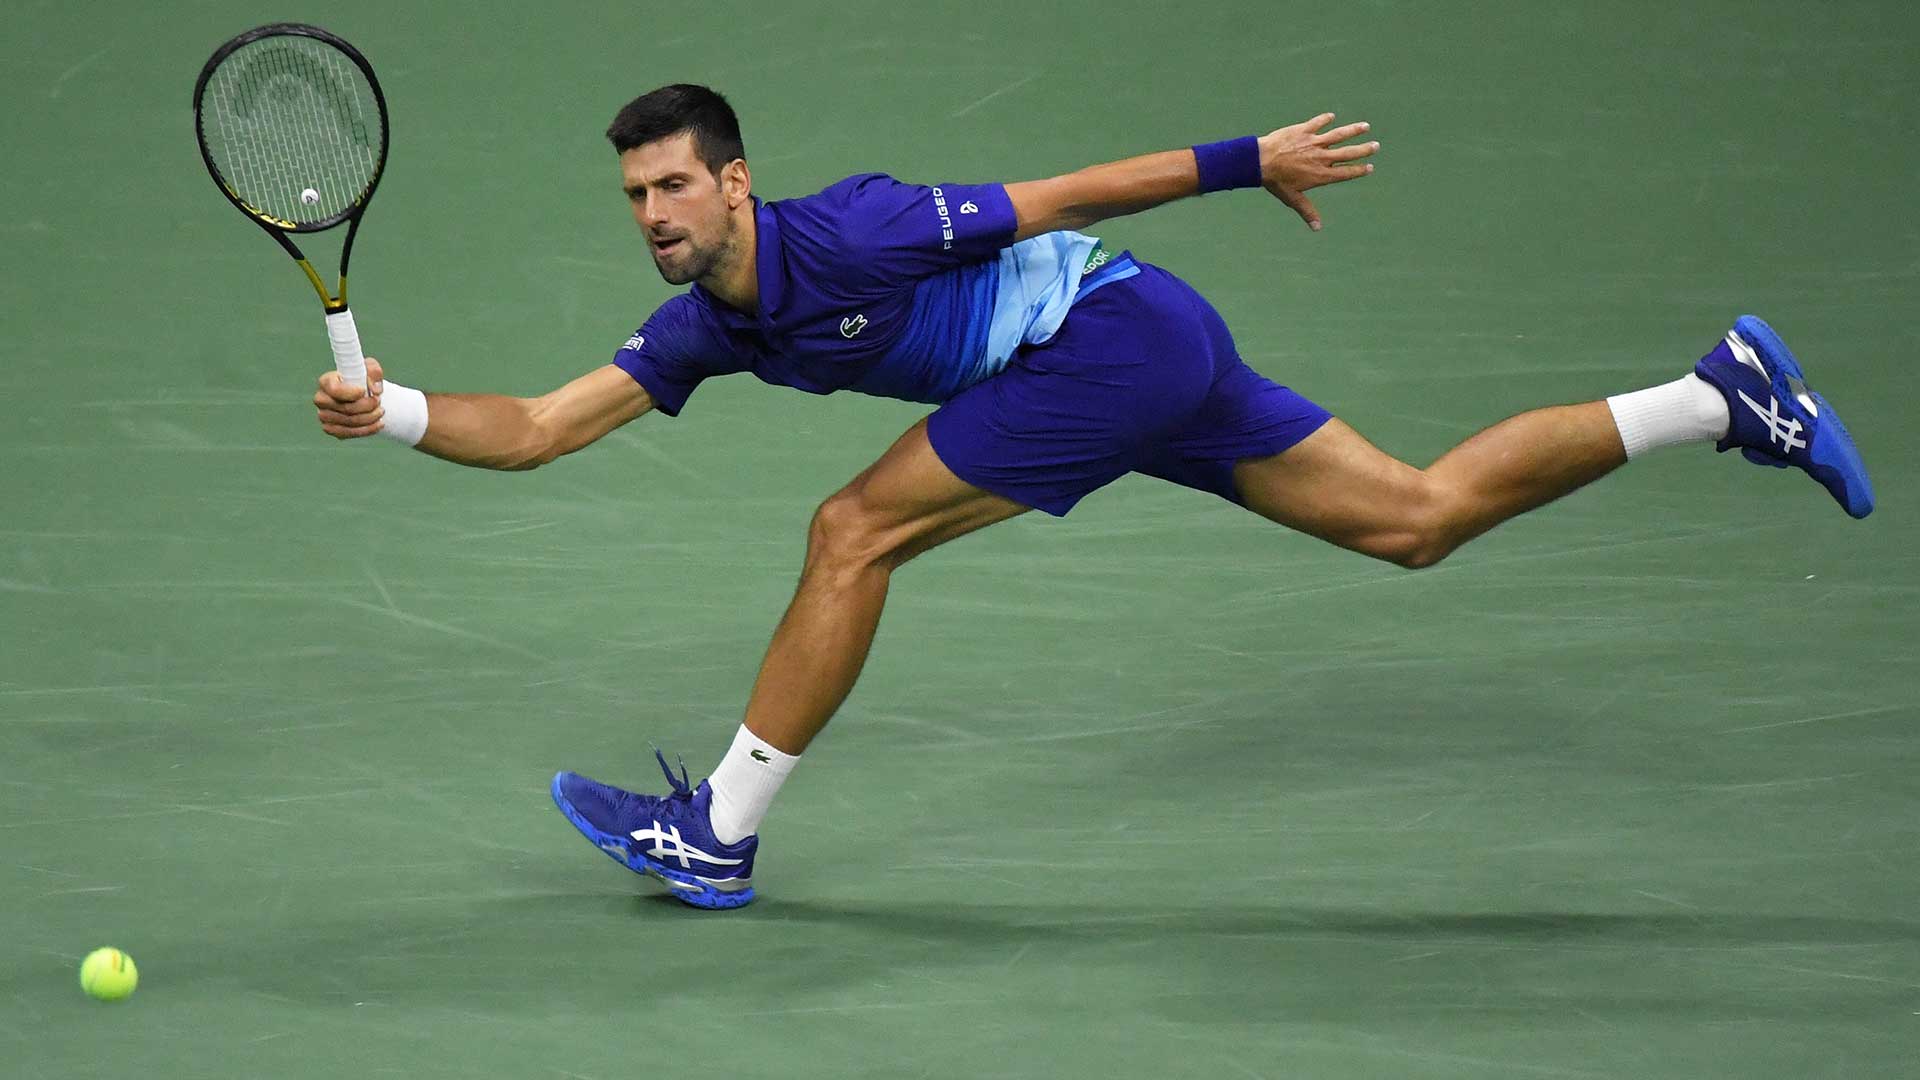 <a href='https://www.atptour.com/en/players/novak-djokovic/d643/overview'>Novak Djokovic</a> has rallied from a set down four times during this year's <a href='https://www.atptour.com/en/tournaments/us-open/560/overview'>US Open</a>.